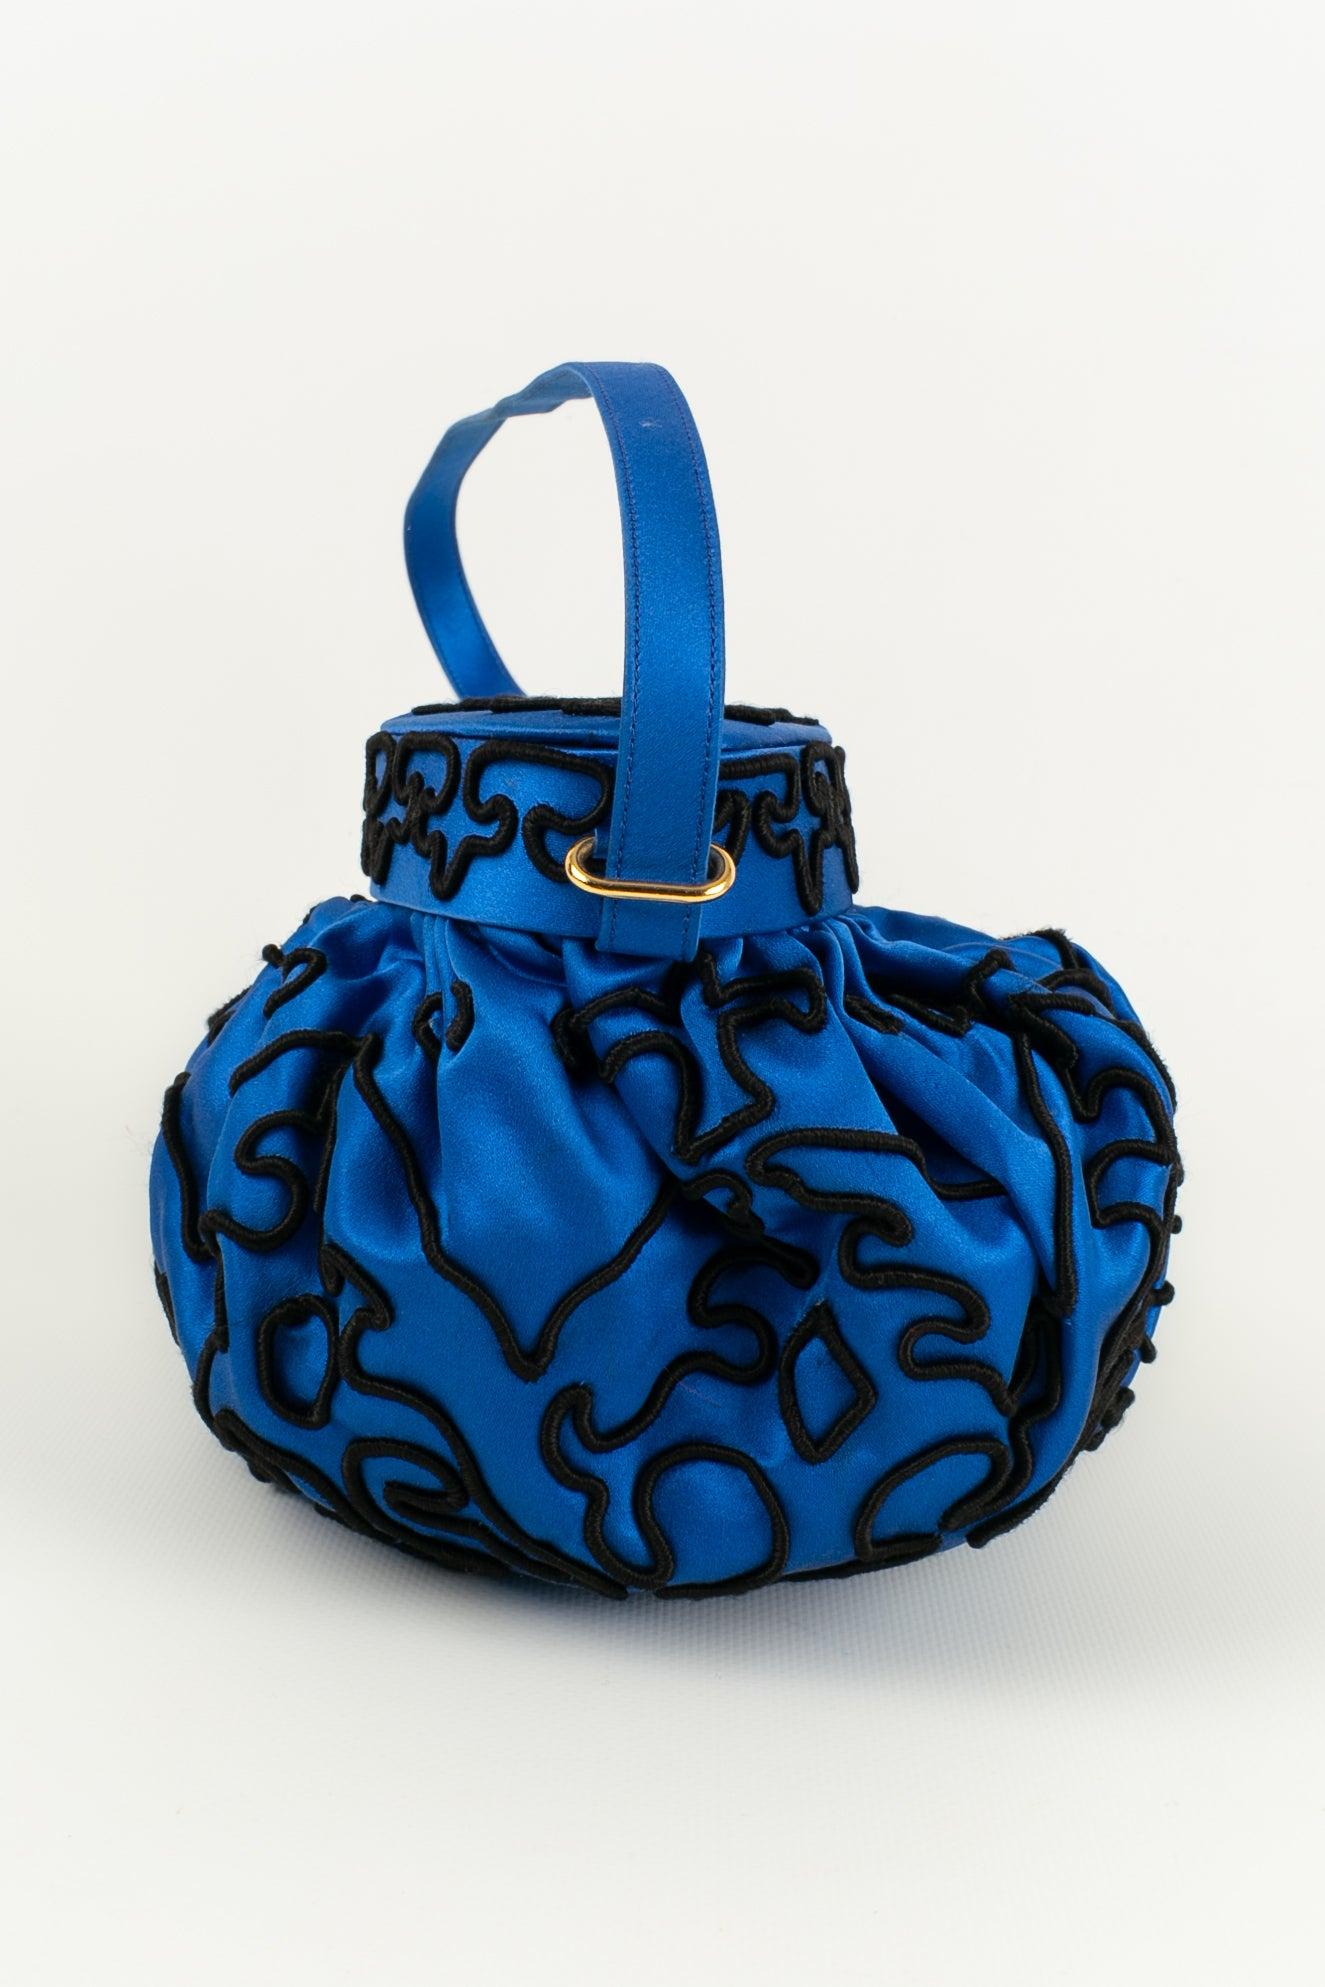 Renaud Pellegrino - (Made in France) Blue silk bag with black trimmings.

Additional information: 
Dimensions: Length: 24 cm, Height: 13 cm, Depth: 16 cm, Handle: 46 cm
Condition: Very good condition
Seller Ref number: S233